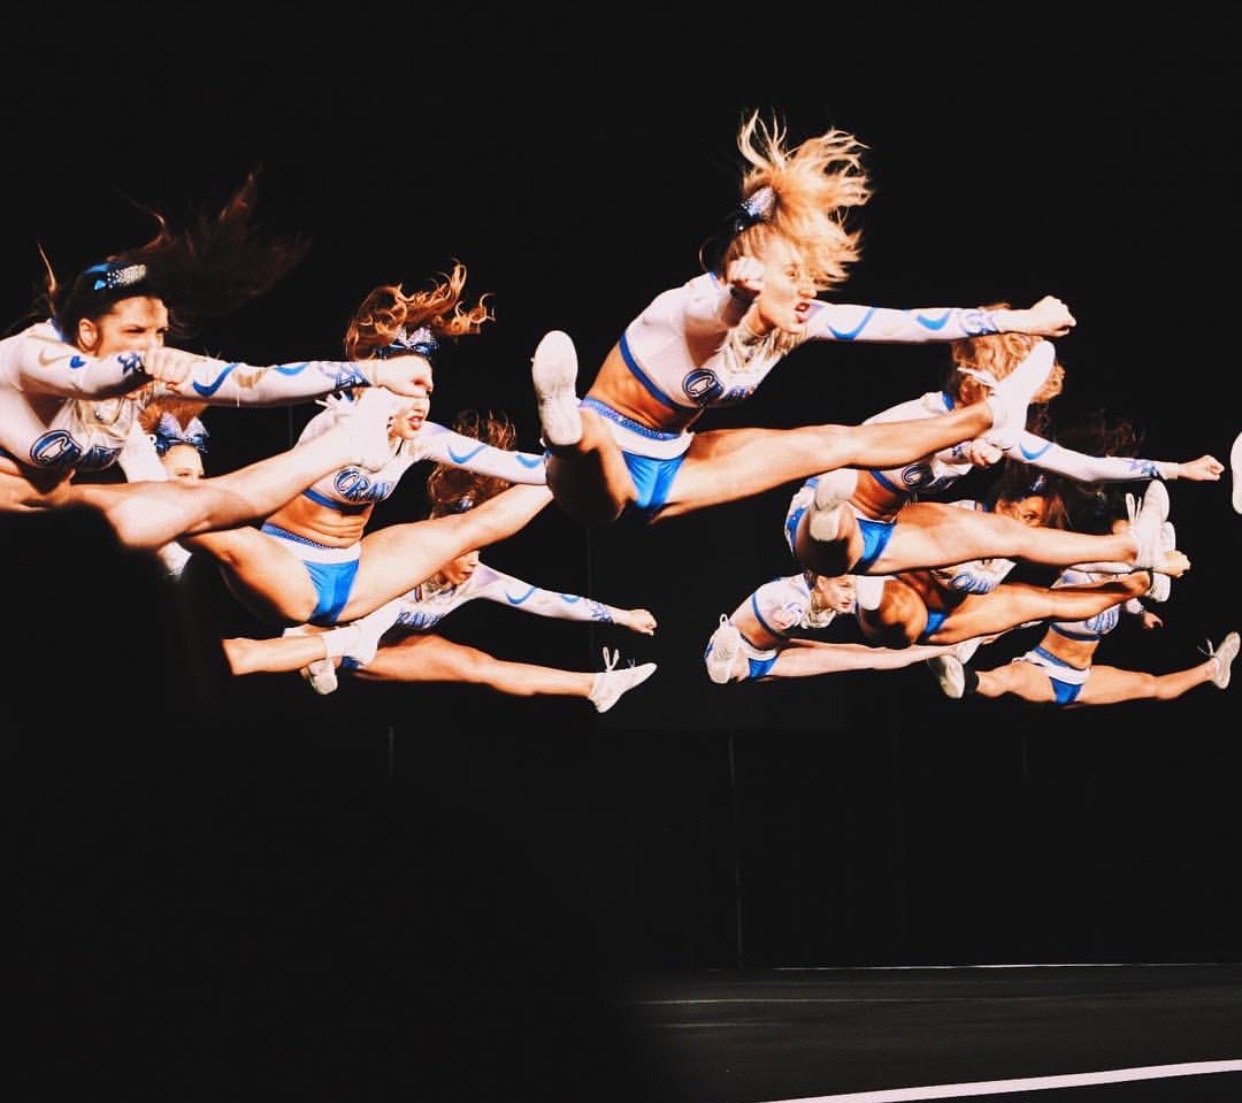 Cheerleaders doing a toe touch